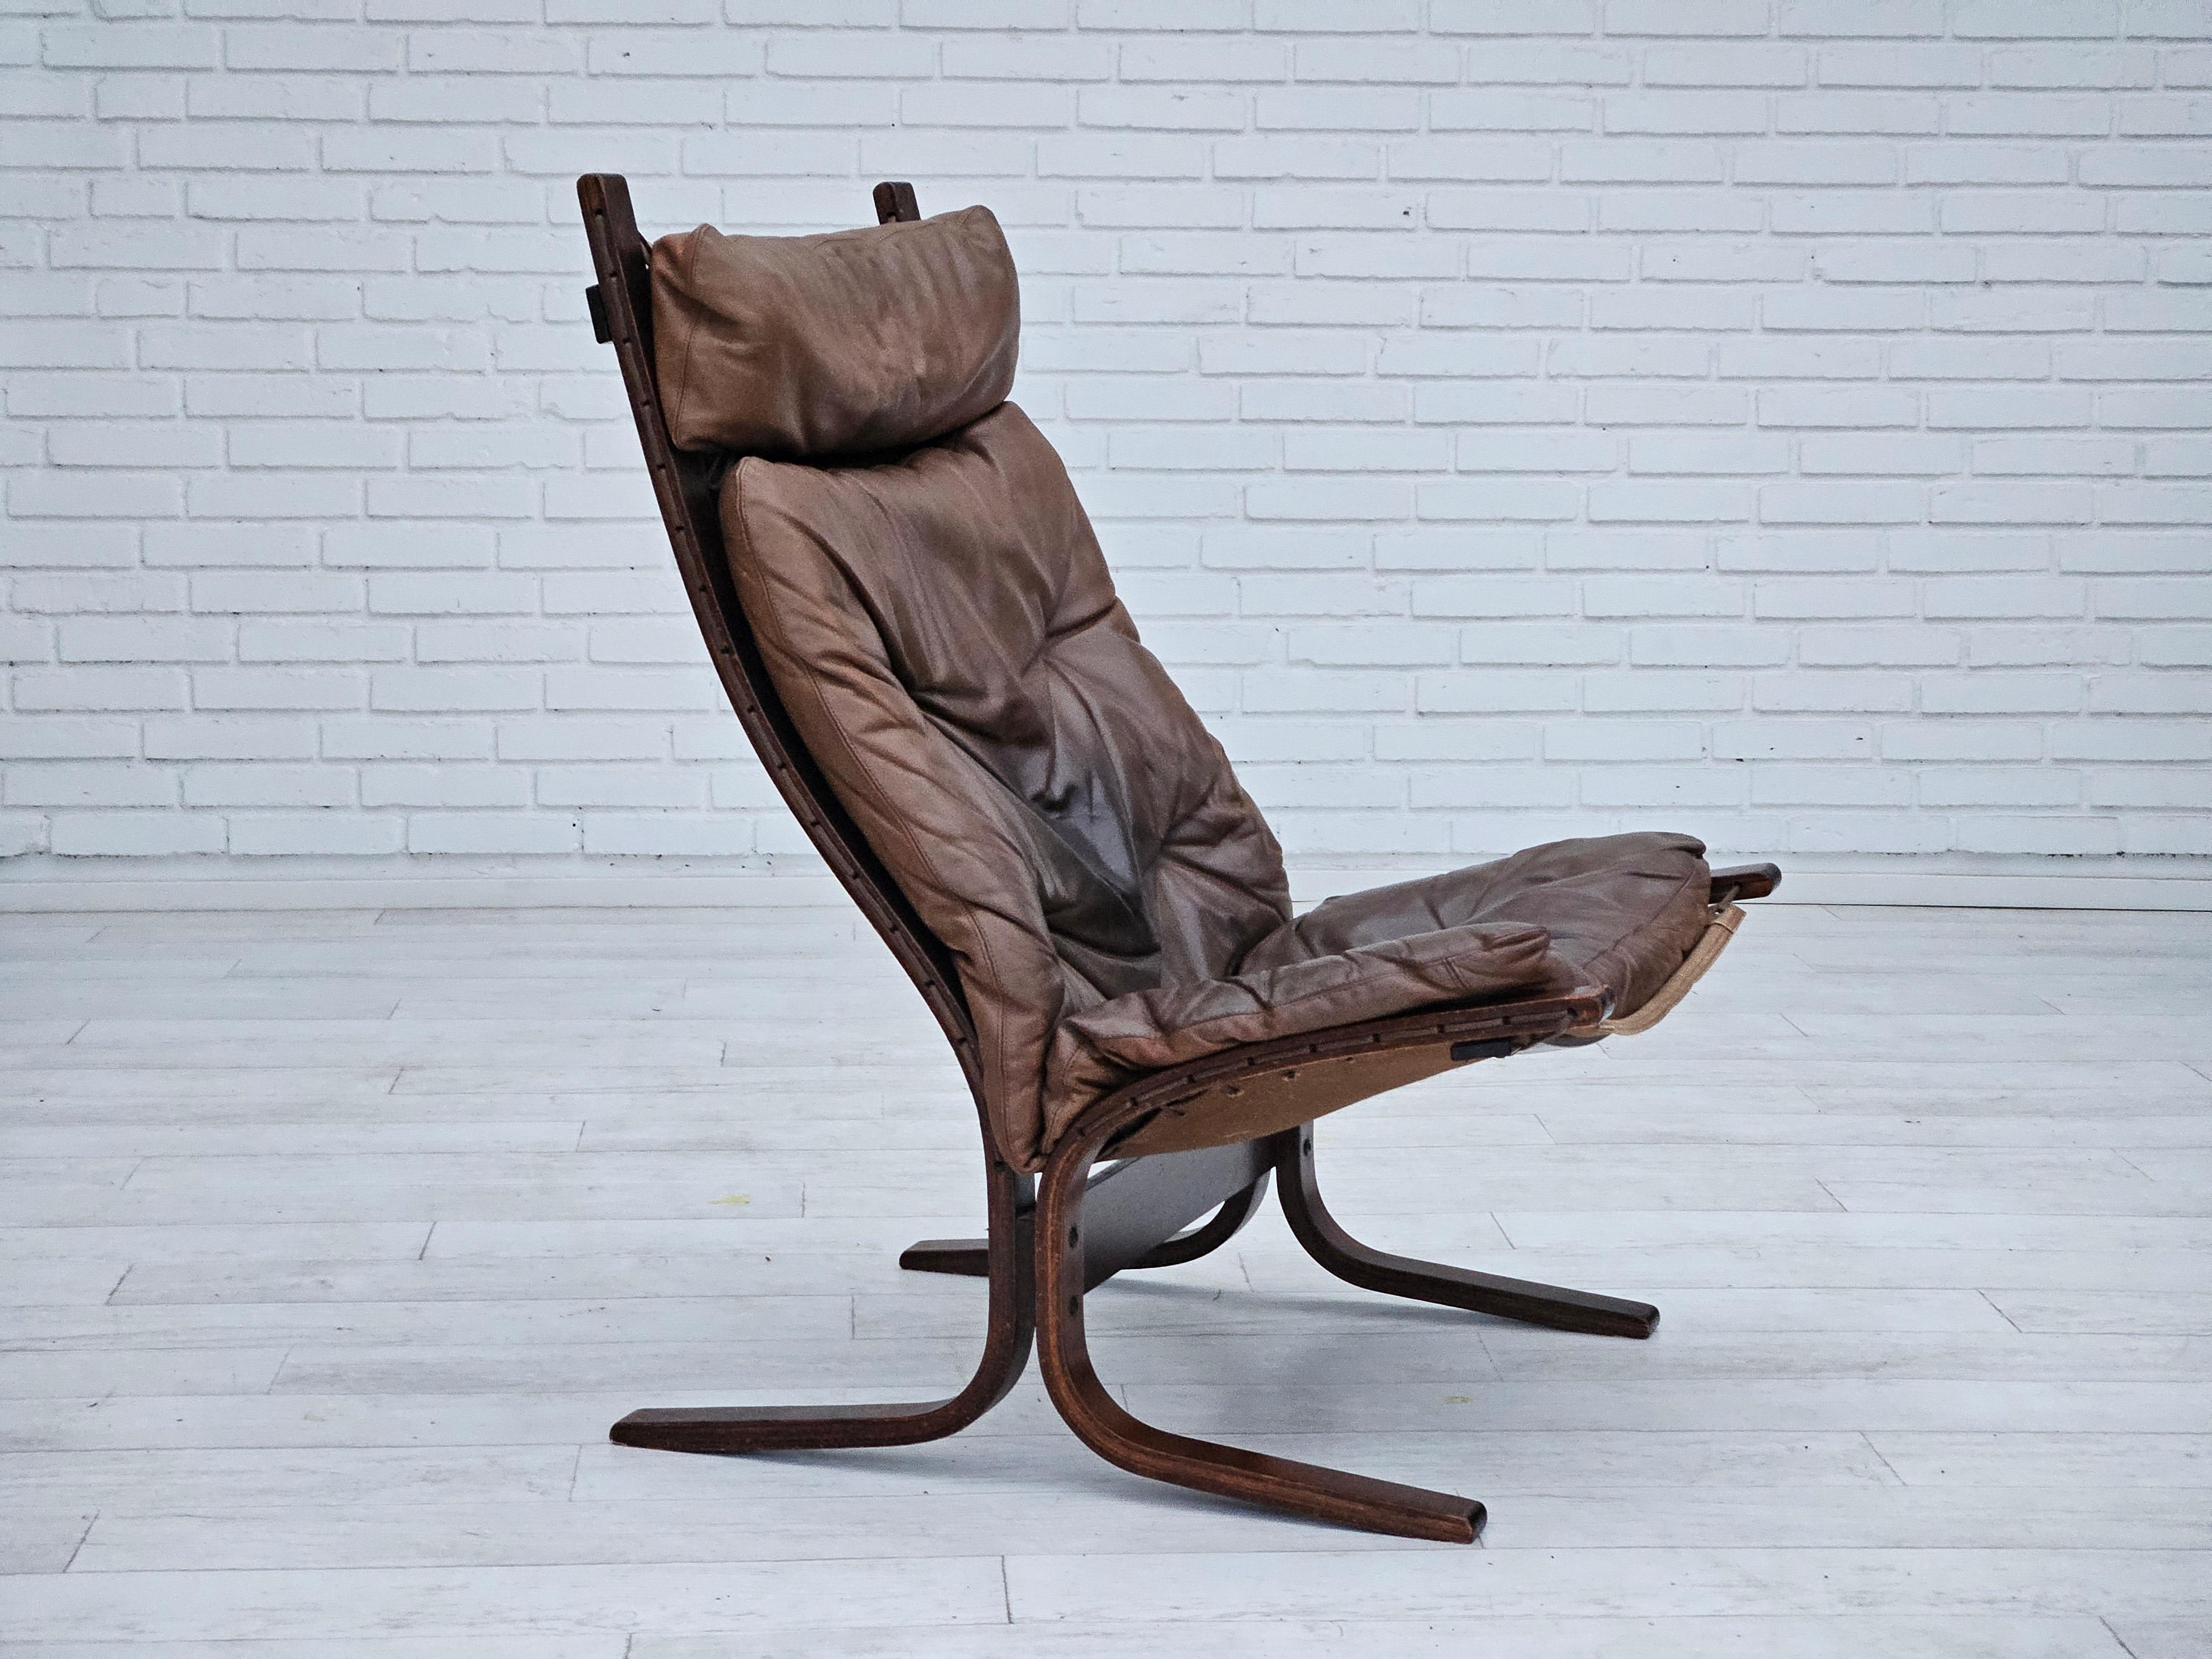 1970s, Norwegian design, relax chair model 'Siesta' by Ingmar Relling for Westnofa. Original good condition with nice patina. No smells and no stains. Brown leather, canvas, and bent wood. 